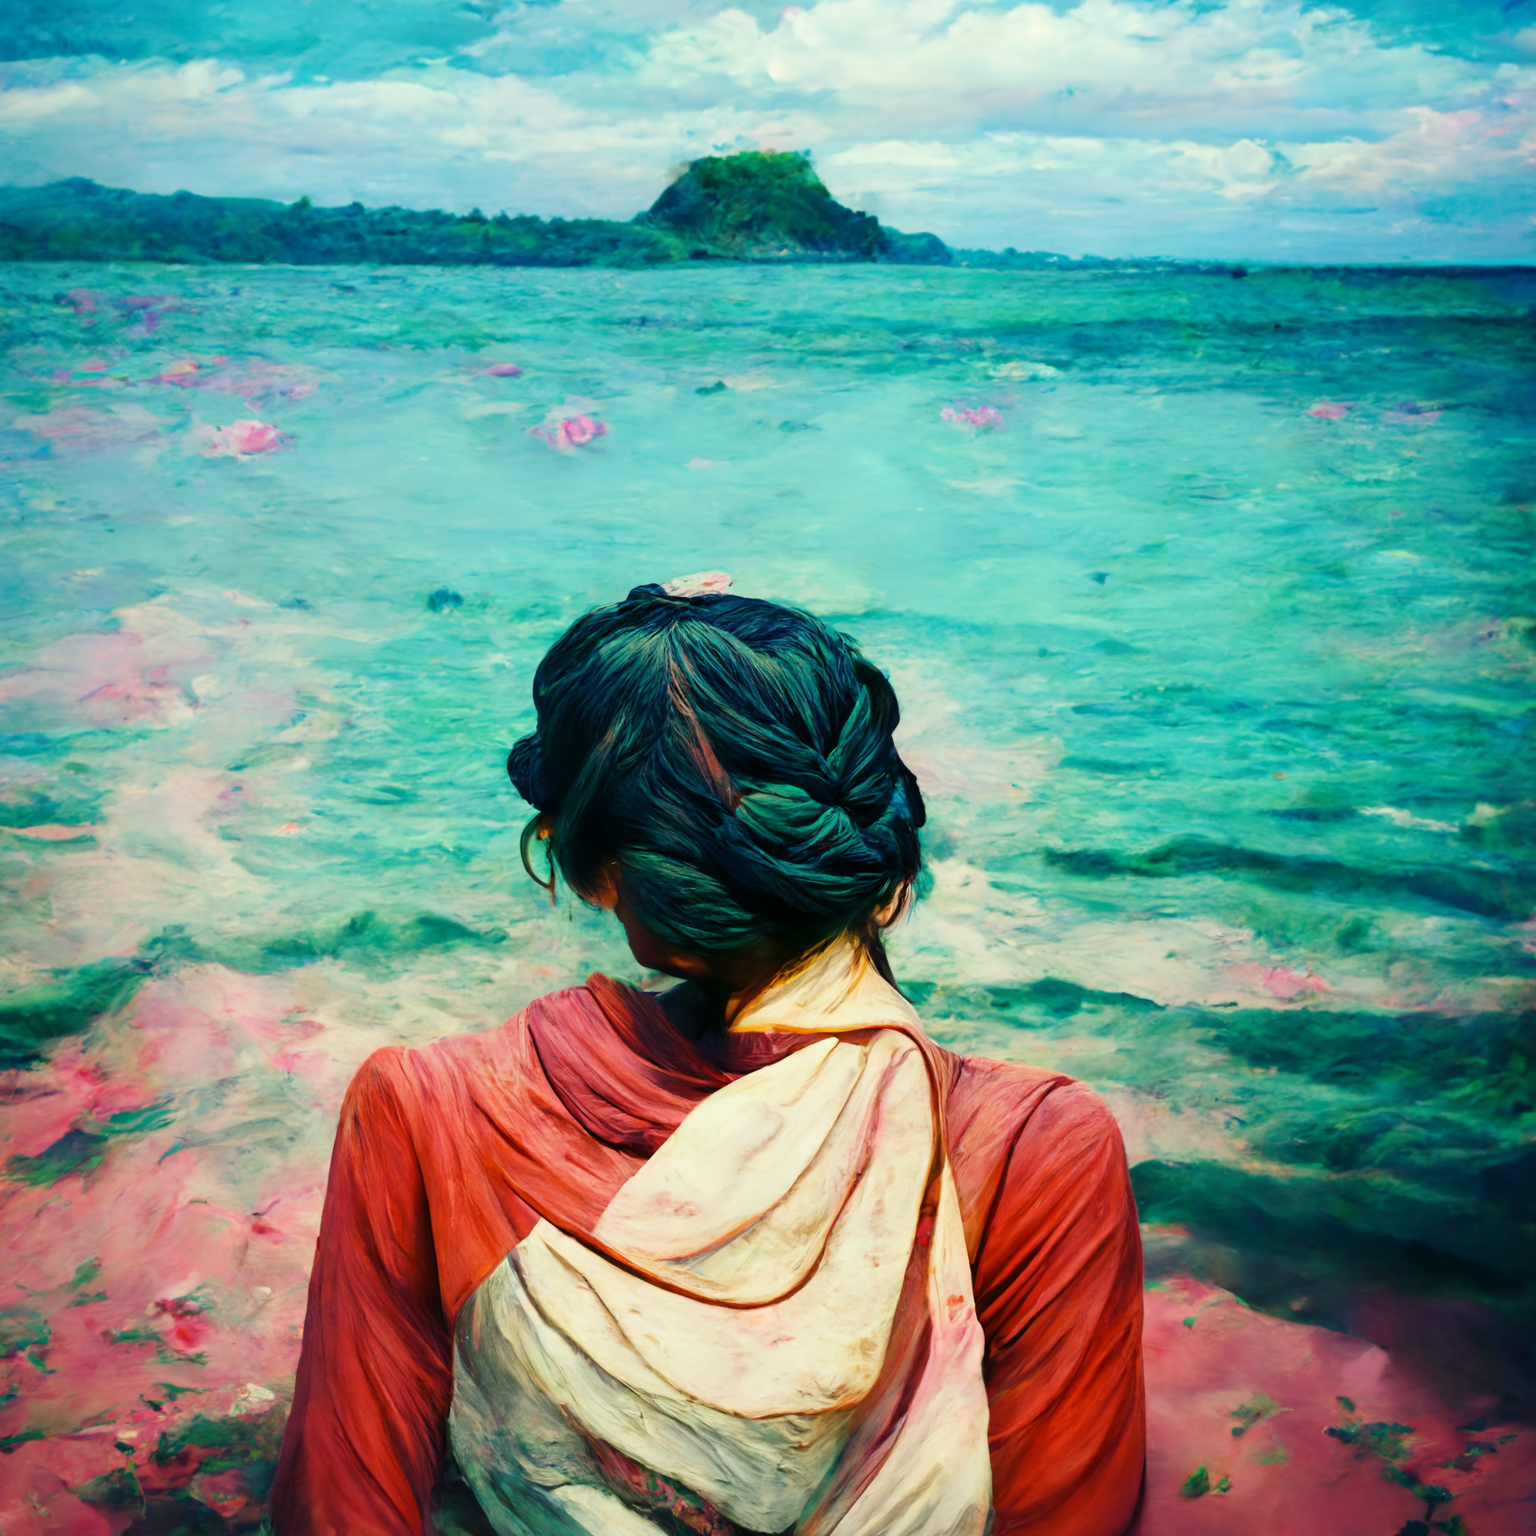 stephentalla rose in lagonoy beach camarines sur surreal 7f93ac58 fd1a 4537 9acf 25d78a7a4841 THE ROSE OF LAGONOY